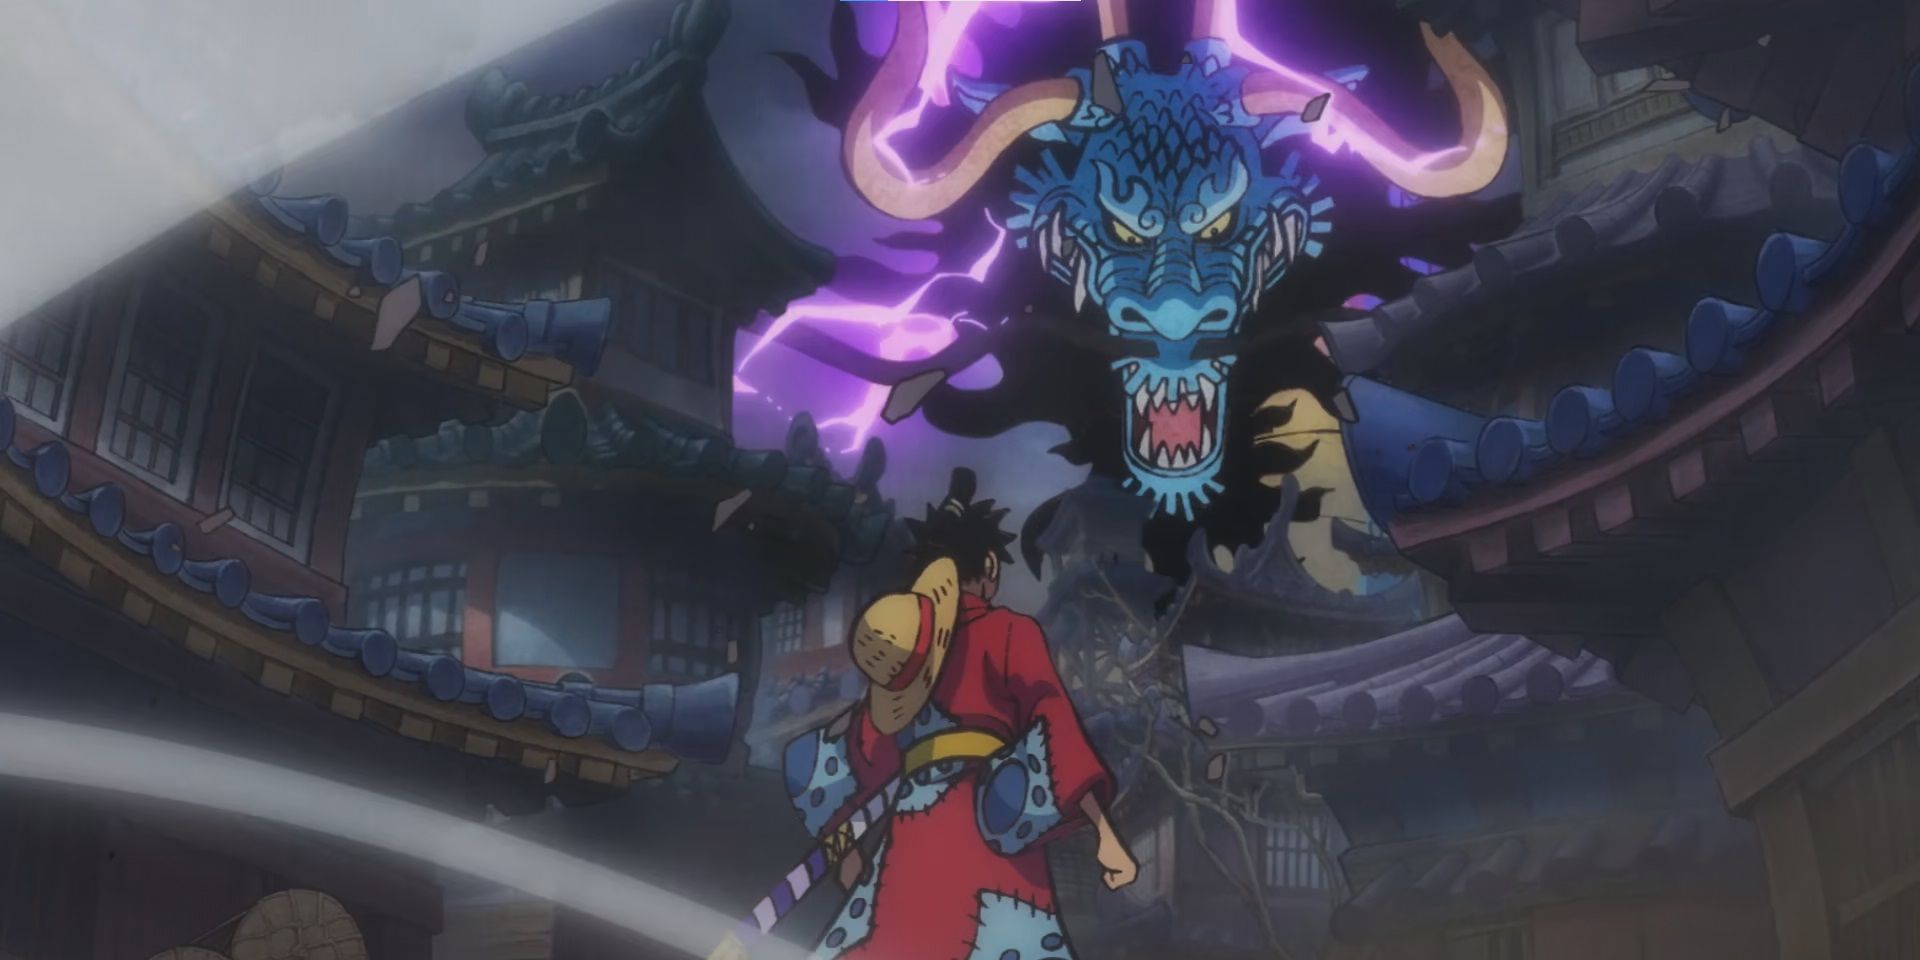 A One Piece anime still shows Kaido loom over Luffy, as he stands by some buildings